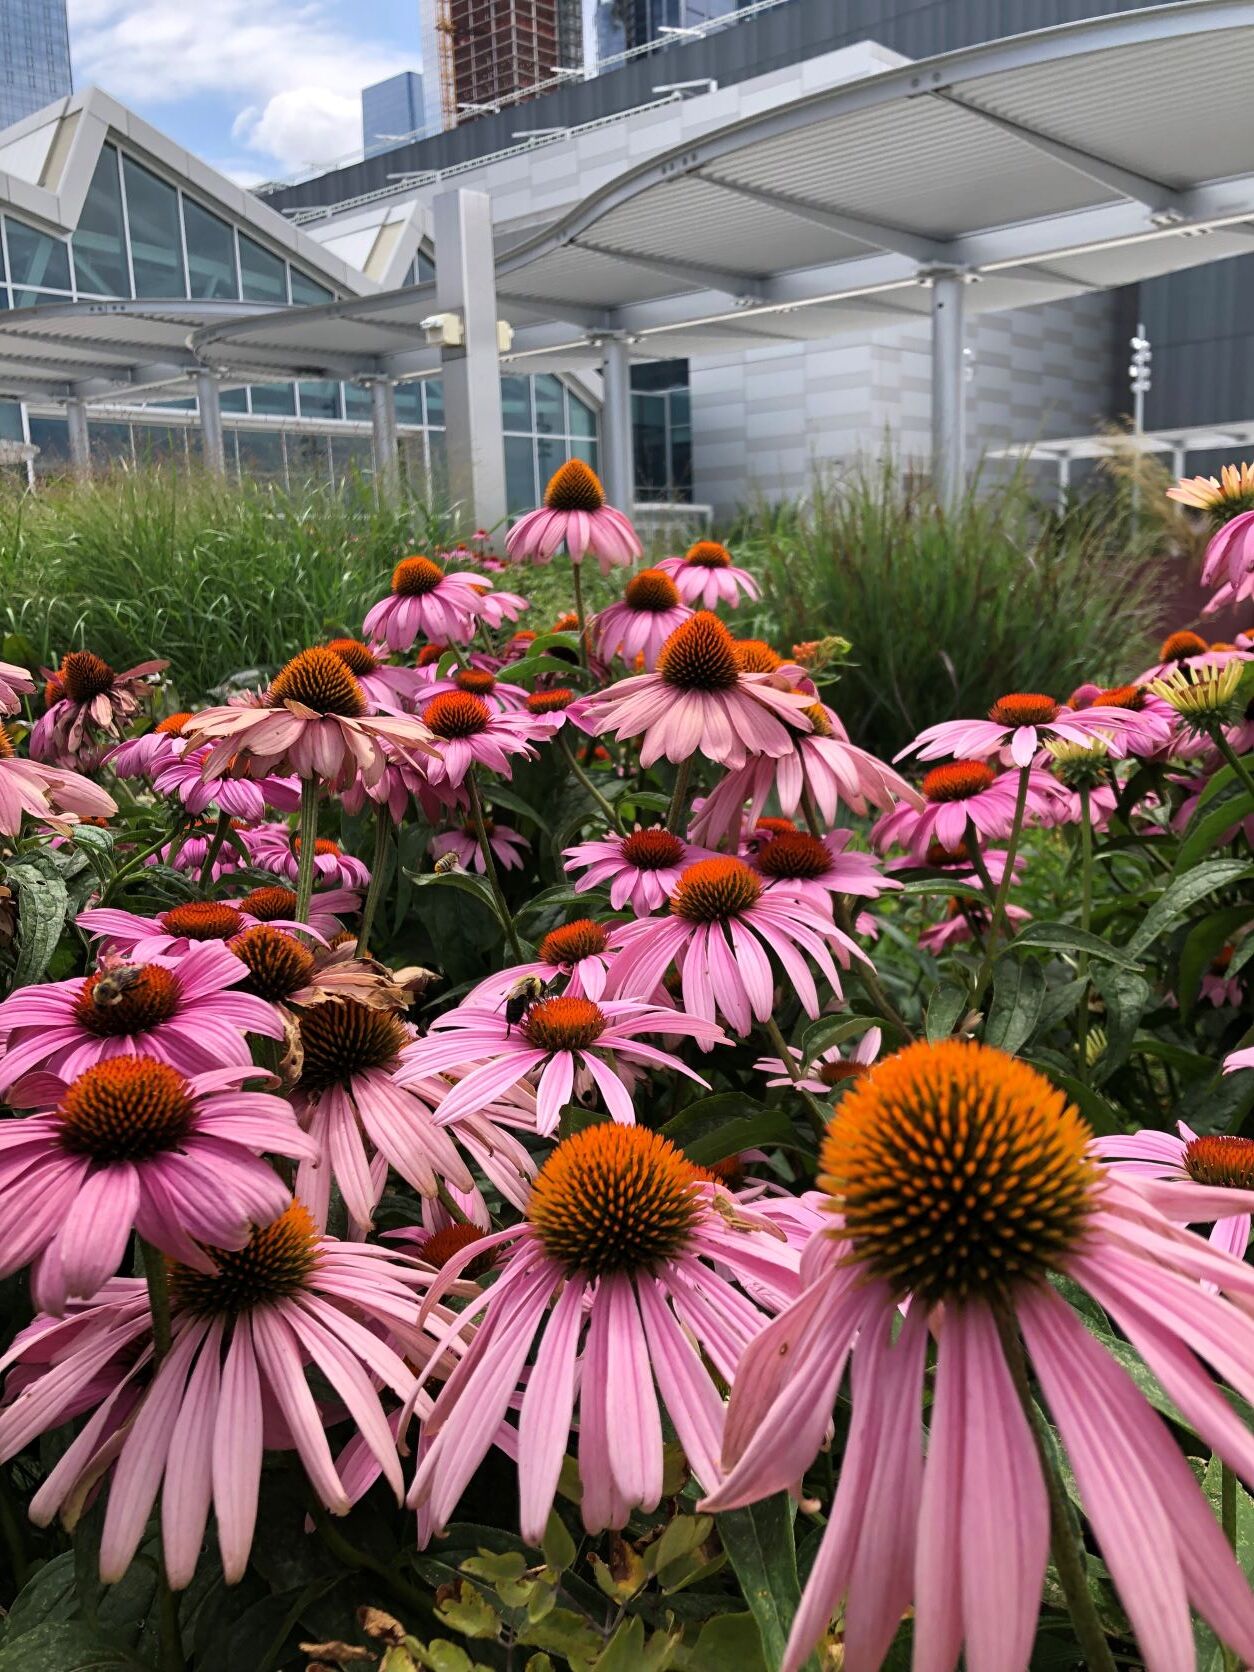 Can you find the native bumblebee and Two-Striped Grasshopper on this Purple Coneflower? They are among the hundreds of kinds of arthropods that have been observed on the Javits Center green roof. Photo: NYC Audubon